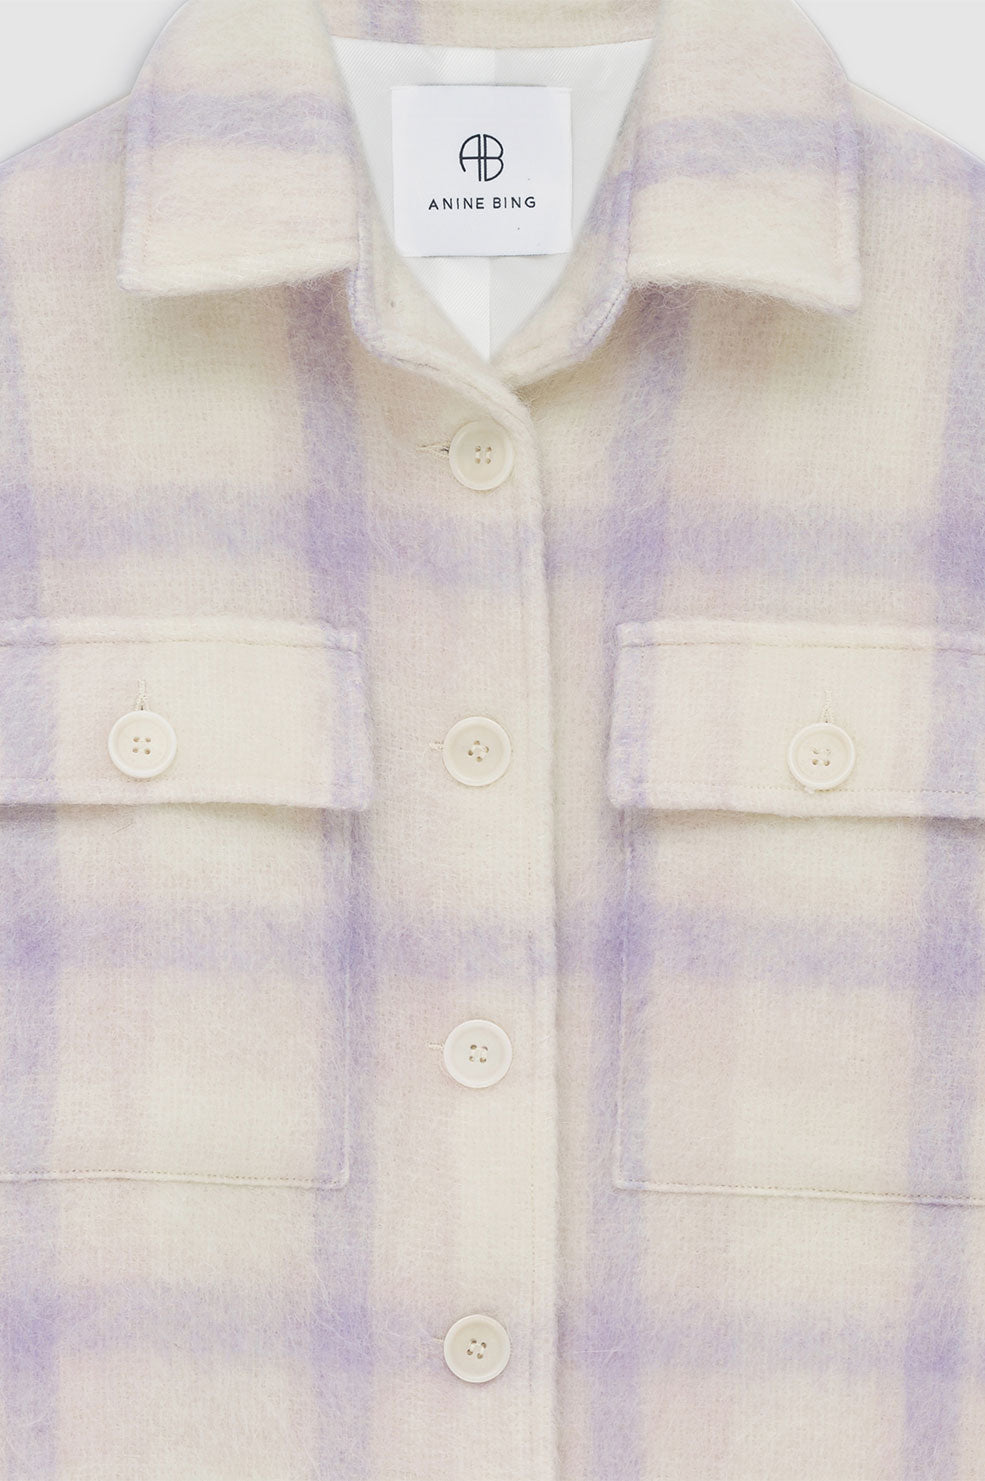 ANINE BING Phoebe Jacket- Lavender And Cream Check - Detail View